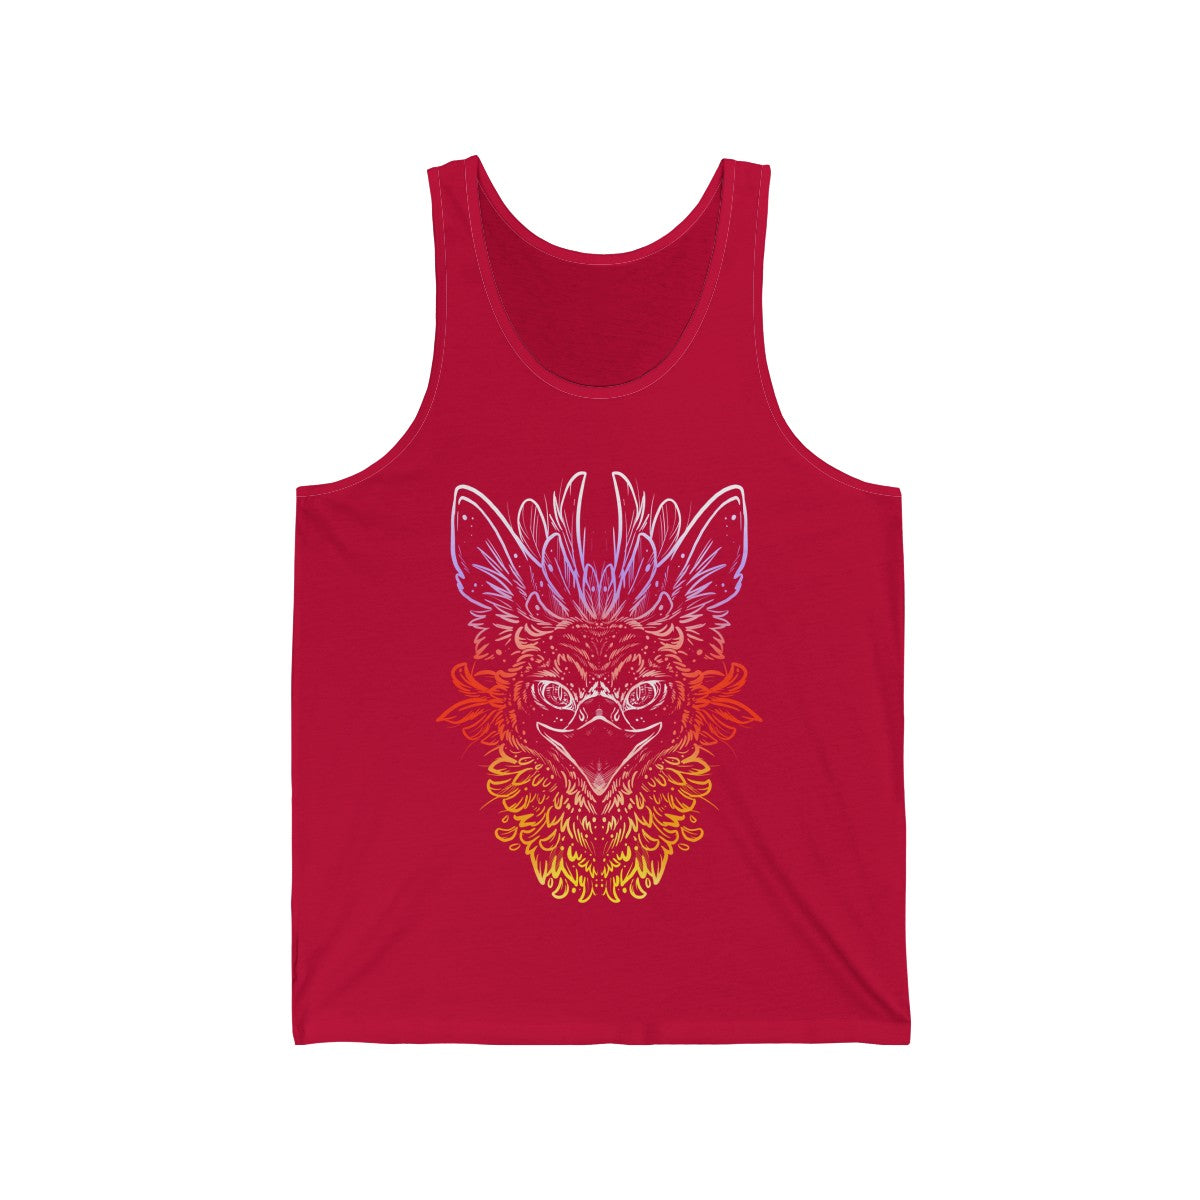 Griffin - Tank Top Tank Top Dire Creatures Red XS 